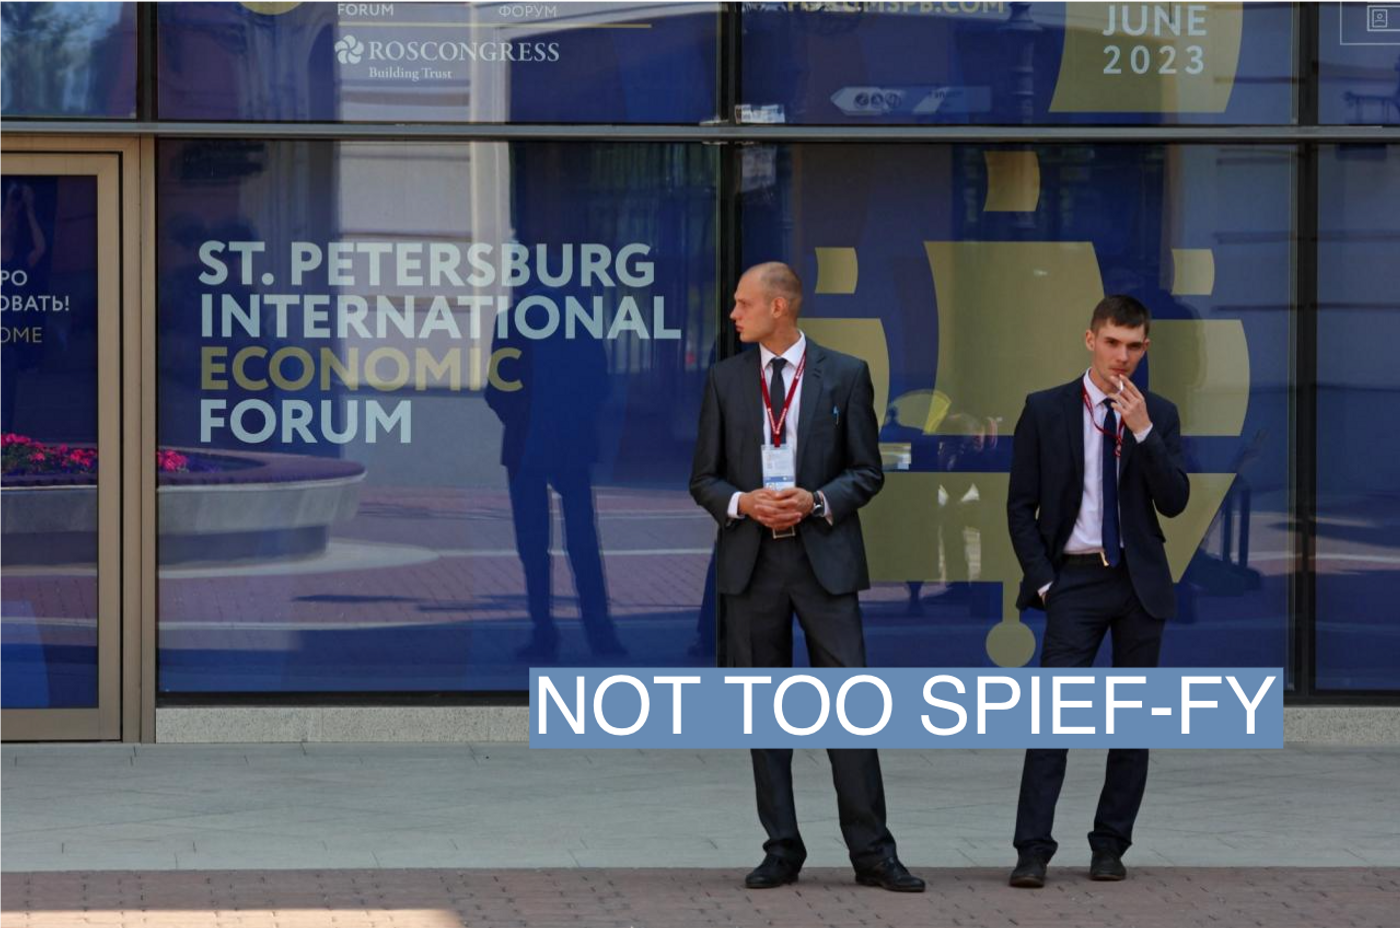 Men stand outside the accreditation centre for participants of the St. Petersburg International Economic Forum (SPIEF) and media representatives in Saint Petersburg, Russia June 14, 2023. REUTERS/Anton Vaganov